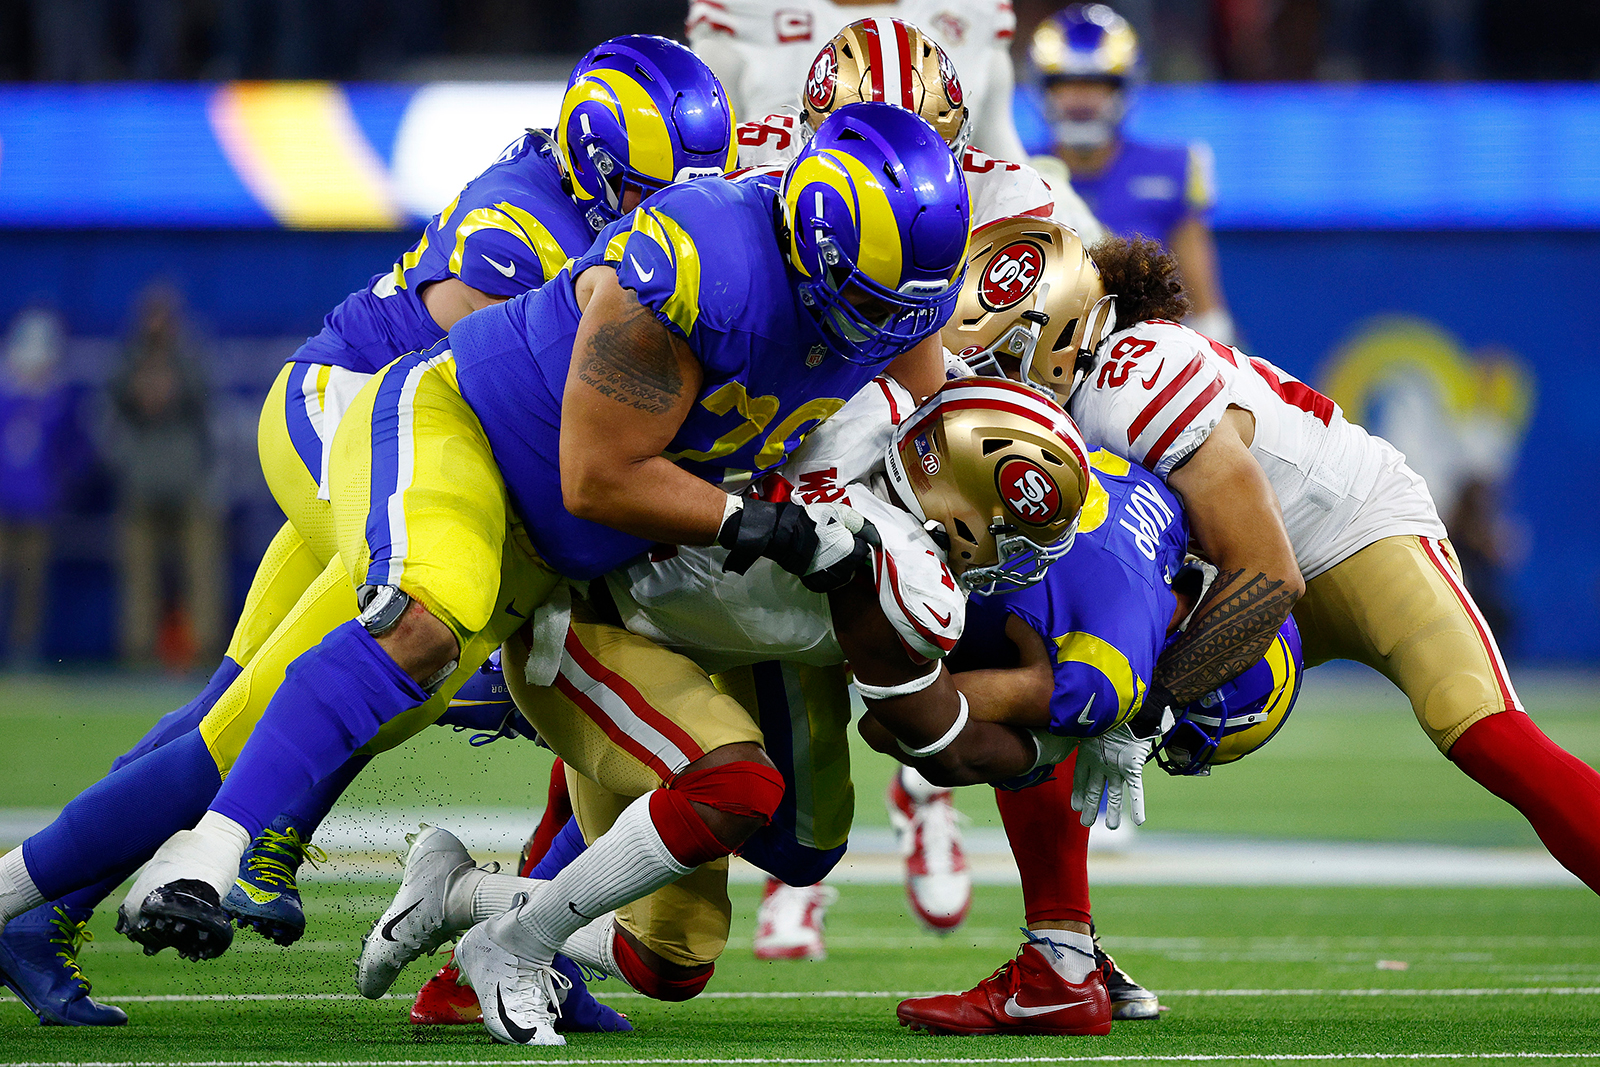 Cooper Kupp #10 of the Los Angeles Rams is tackled by Jimmie Ward #1 and Talanoa Hufanga #29 of the San Francisco 49ers in the fourth quarter during the NFC Championship Game at SoFi Stadium on January 30, in Inglewood, California.